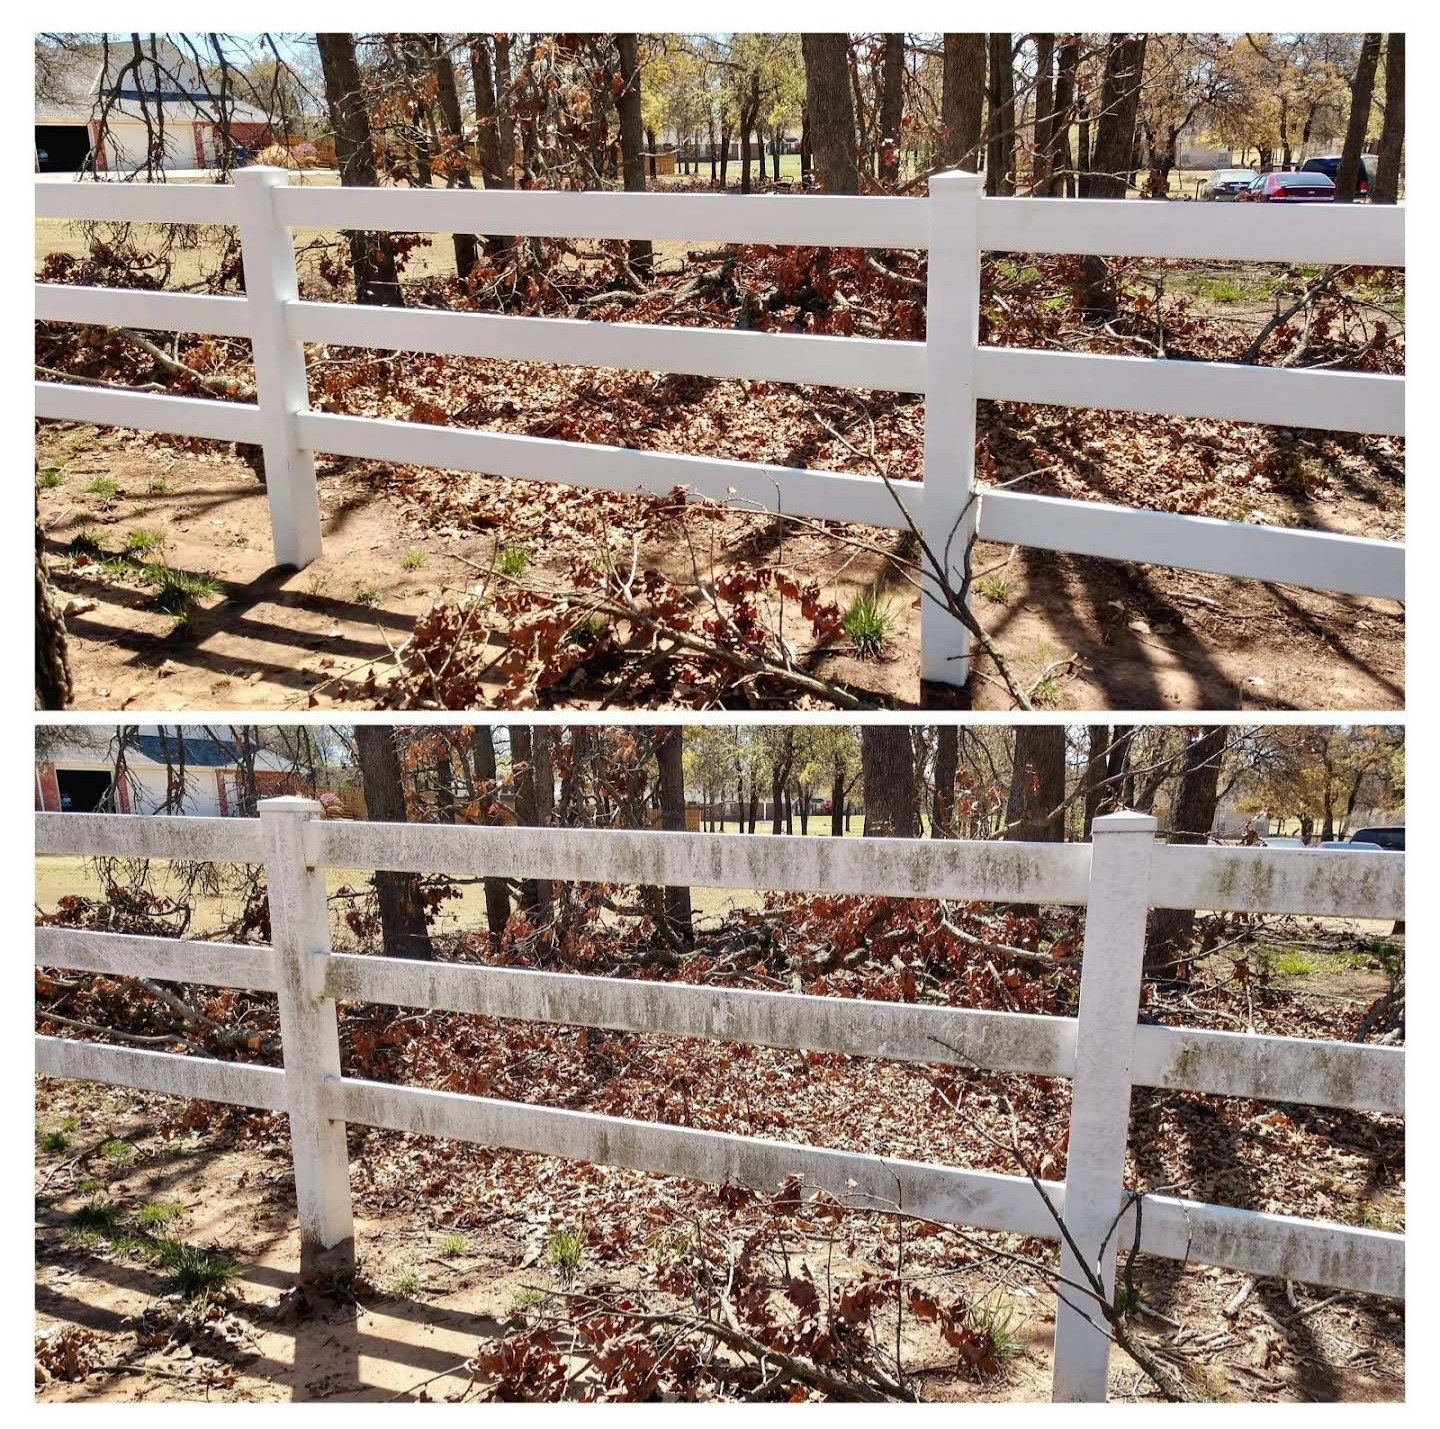 Vinyl Fence Cleaning with Mold and Algea in Oklahoma City, OK